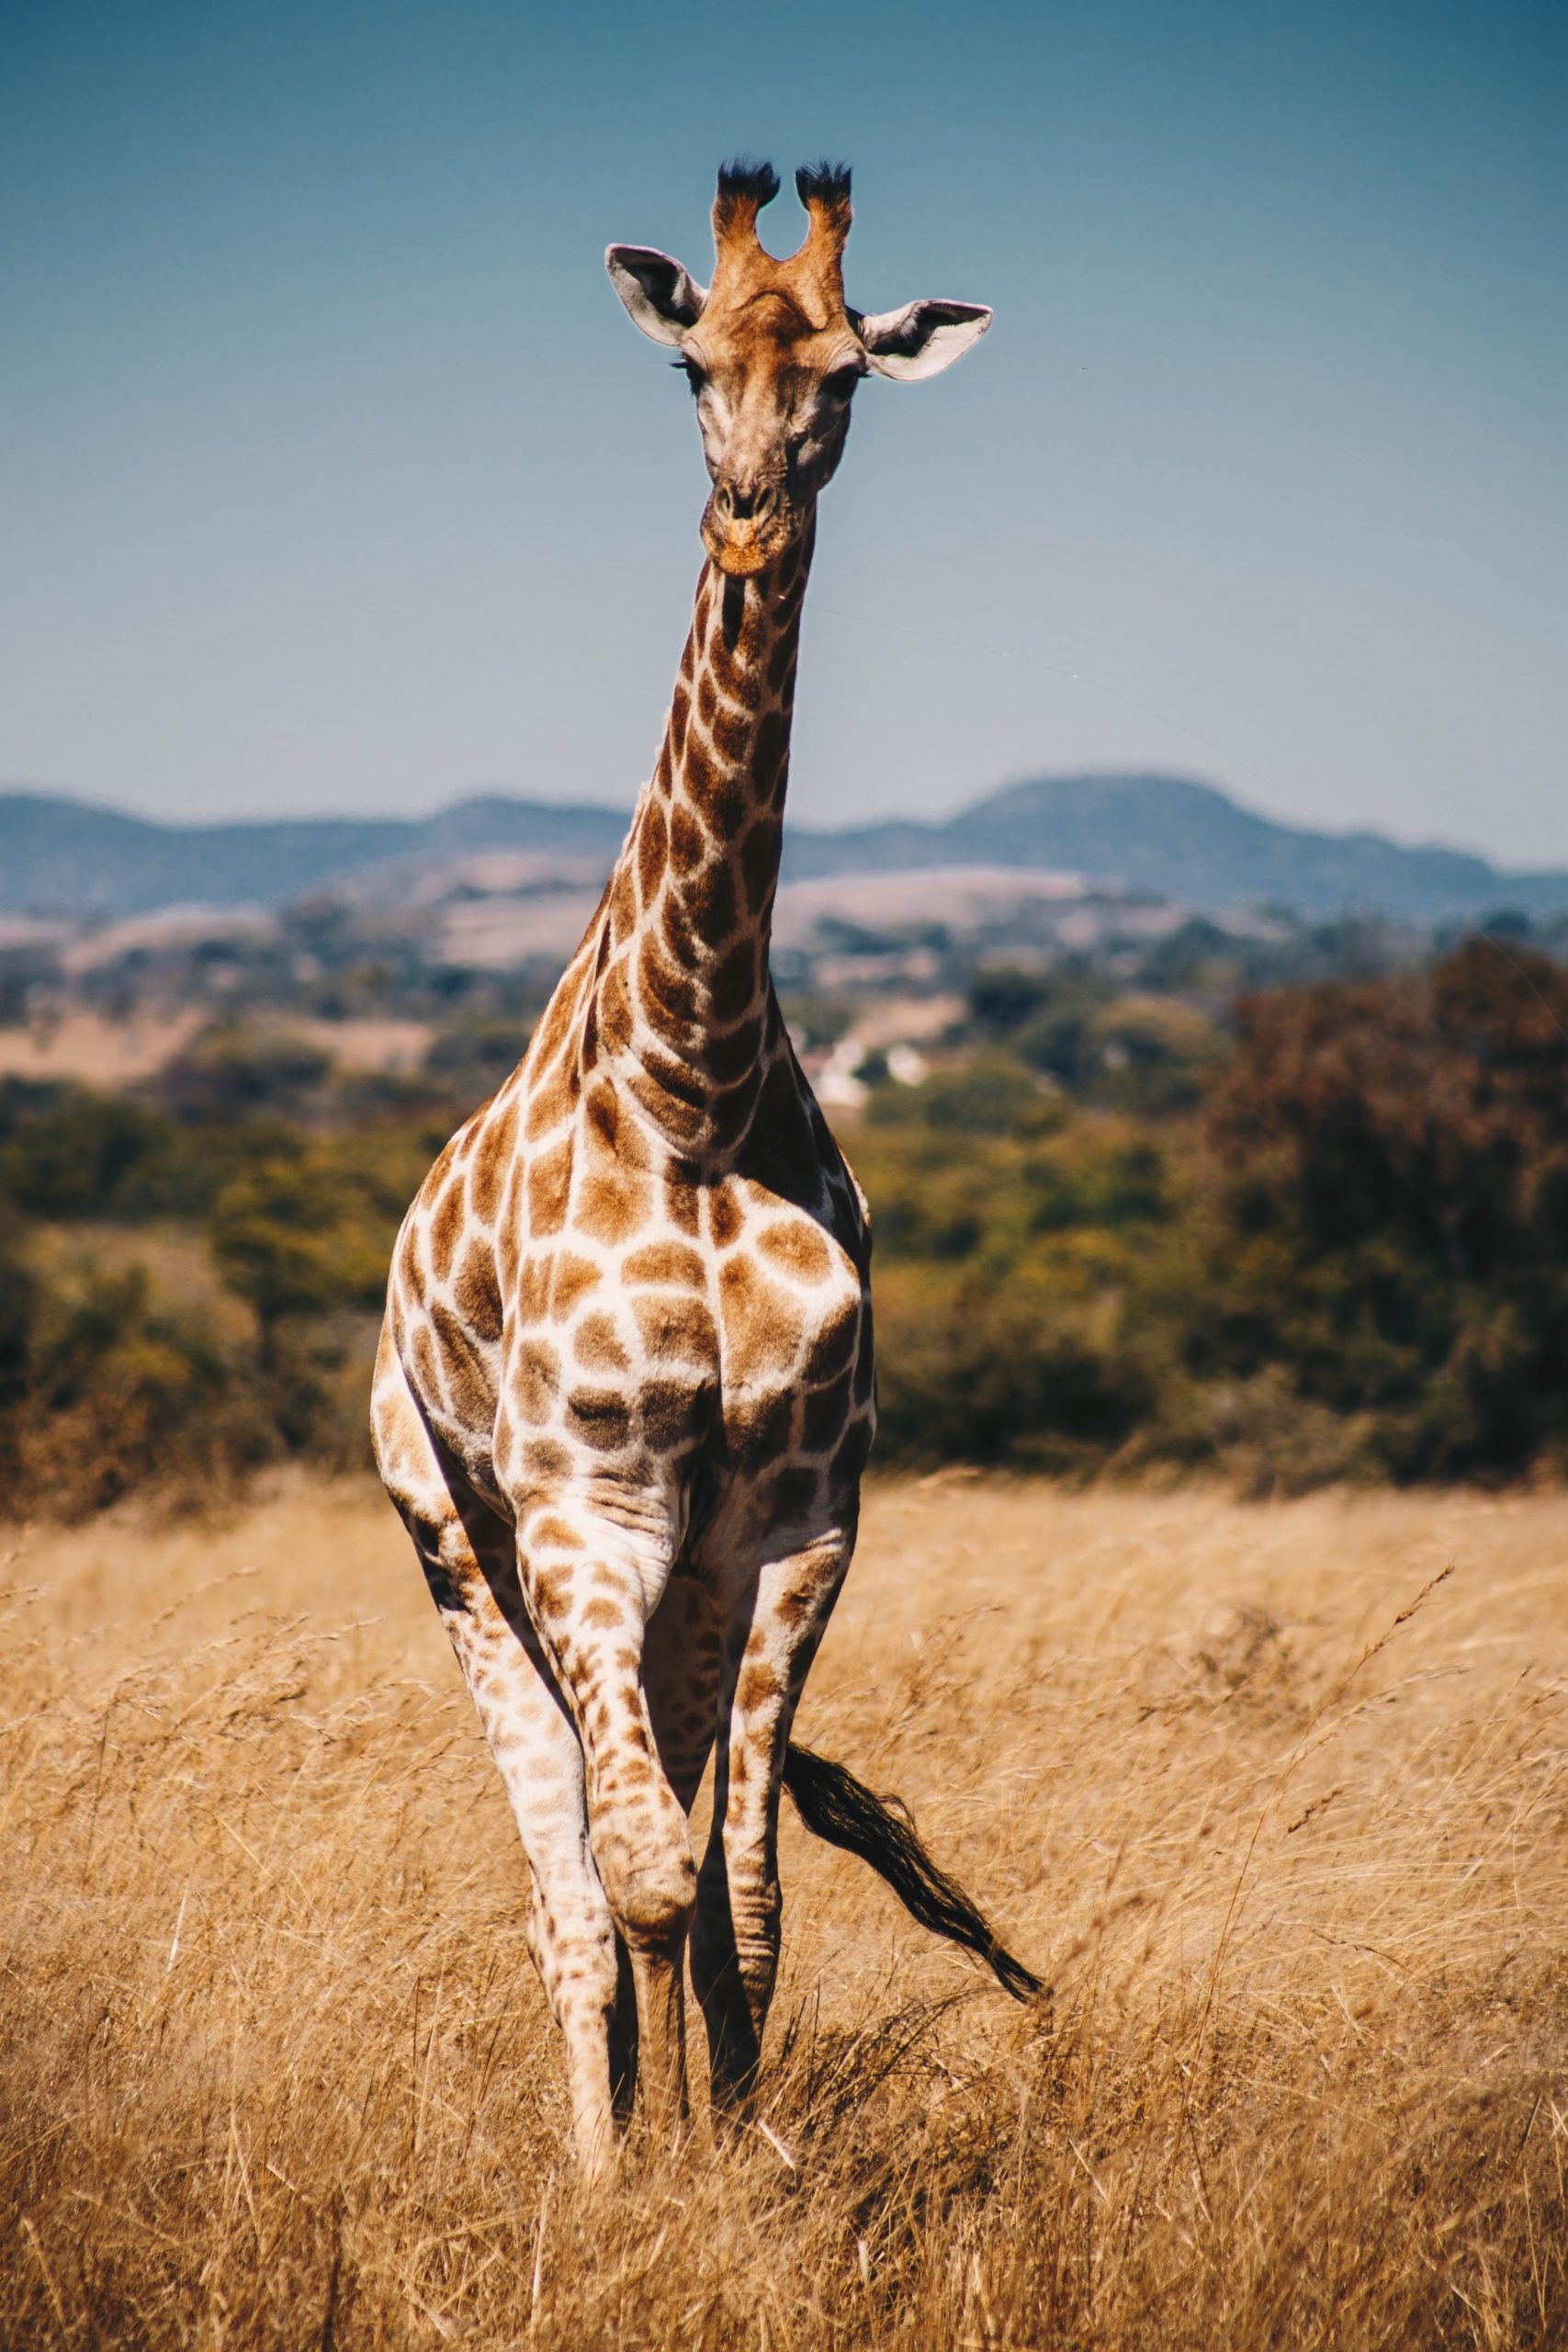 Giraffe: Uniquely adapted to reach vegetation inaccessible to other herbivores. 1710x2560 HD Wallpaper.